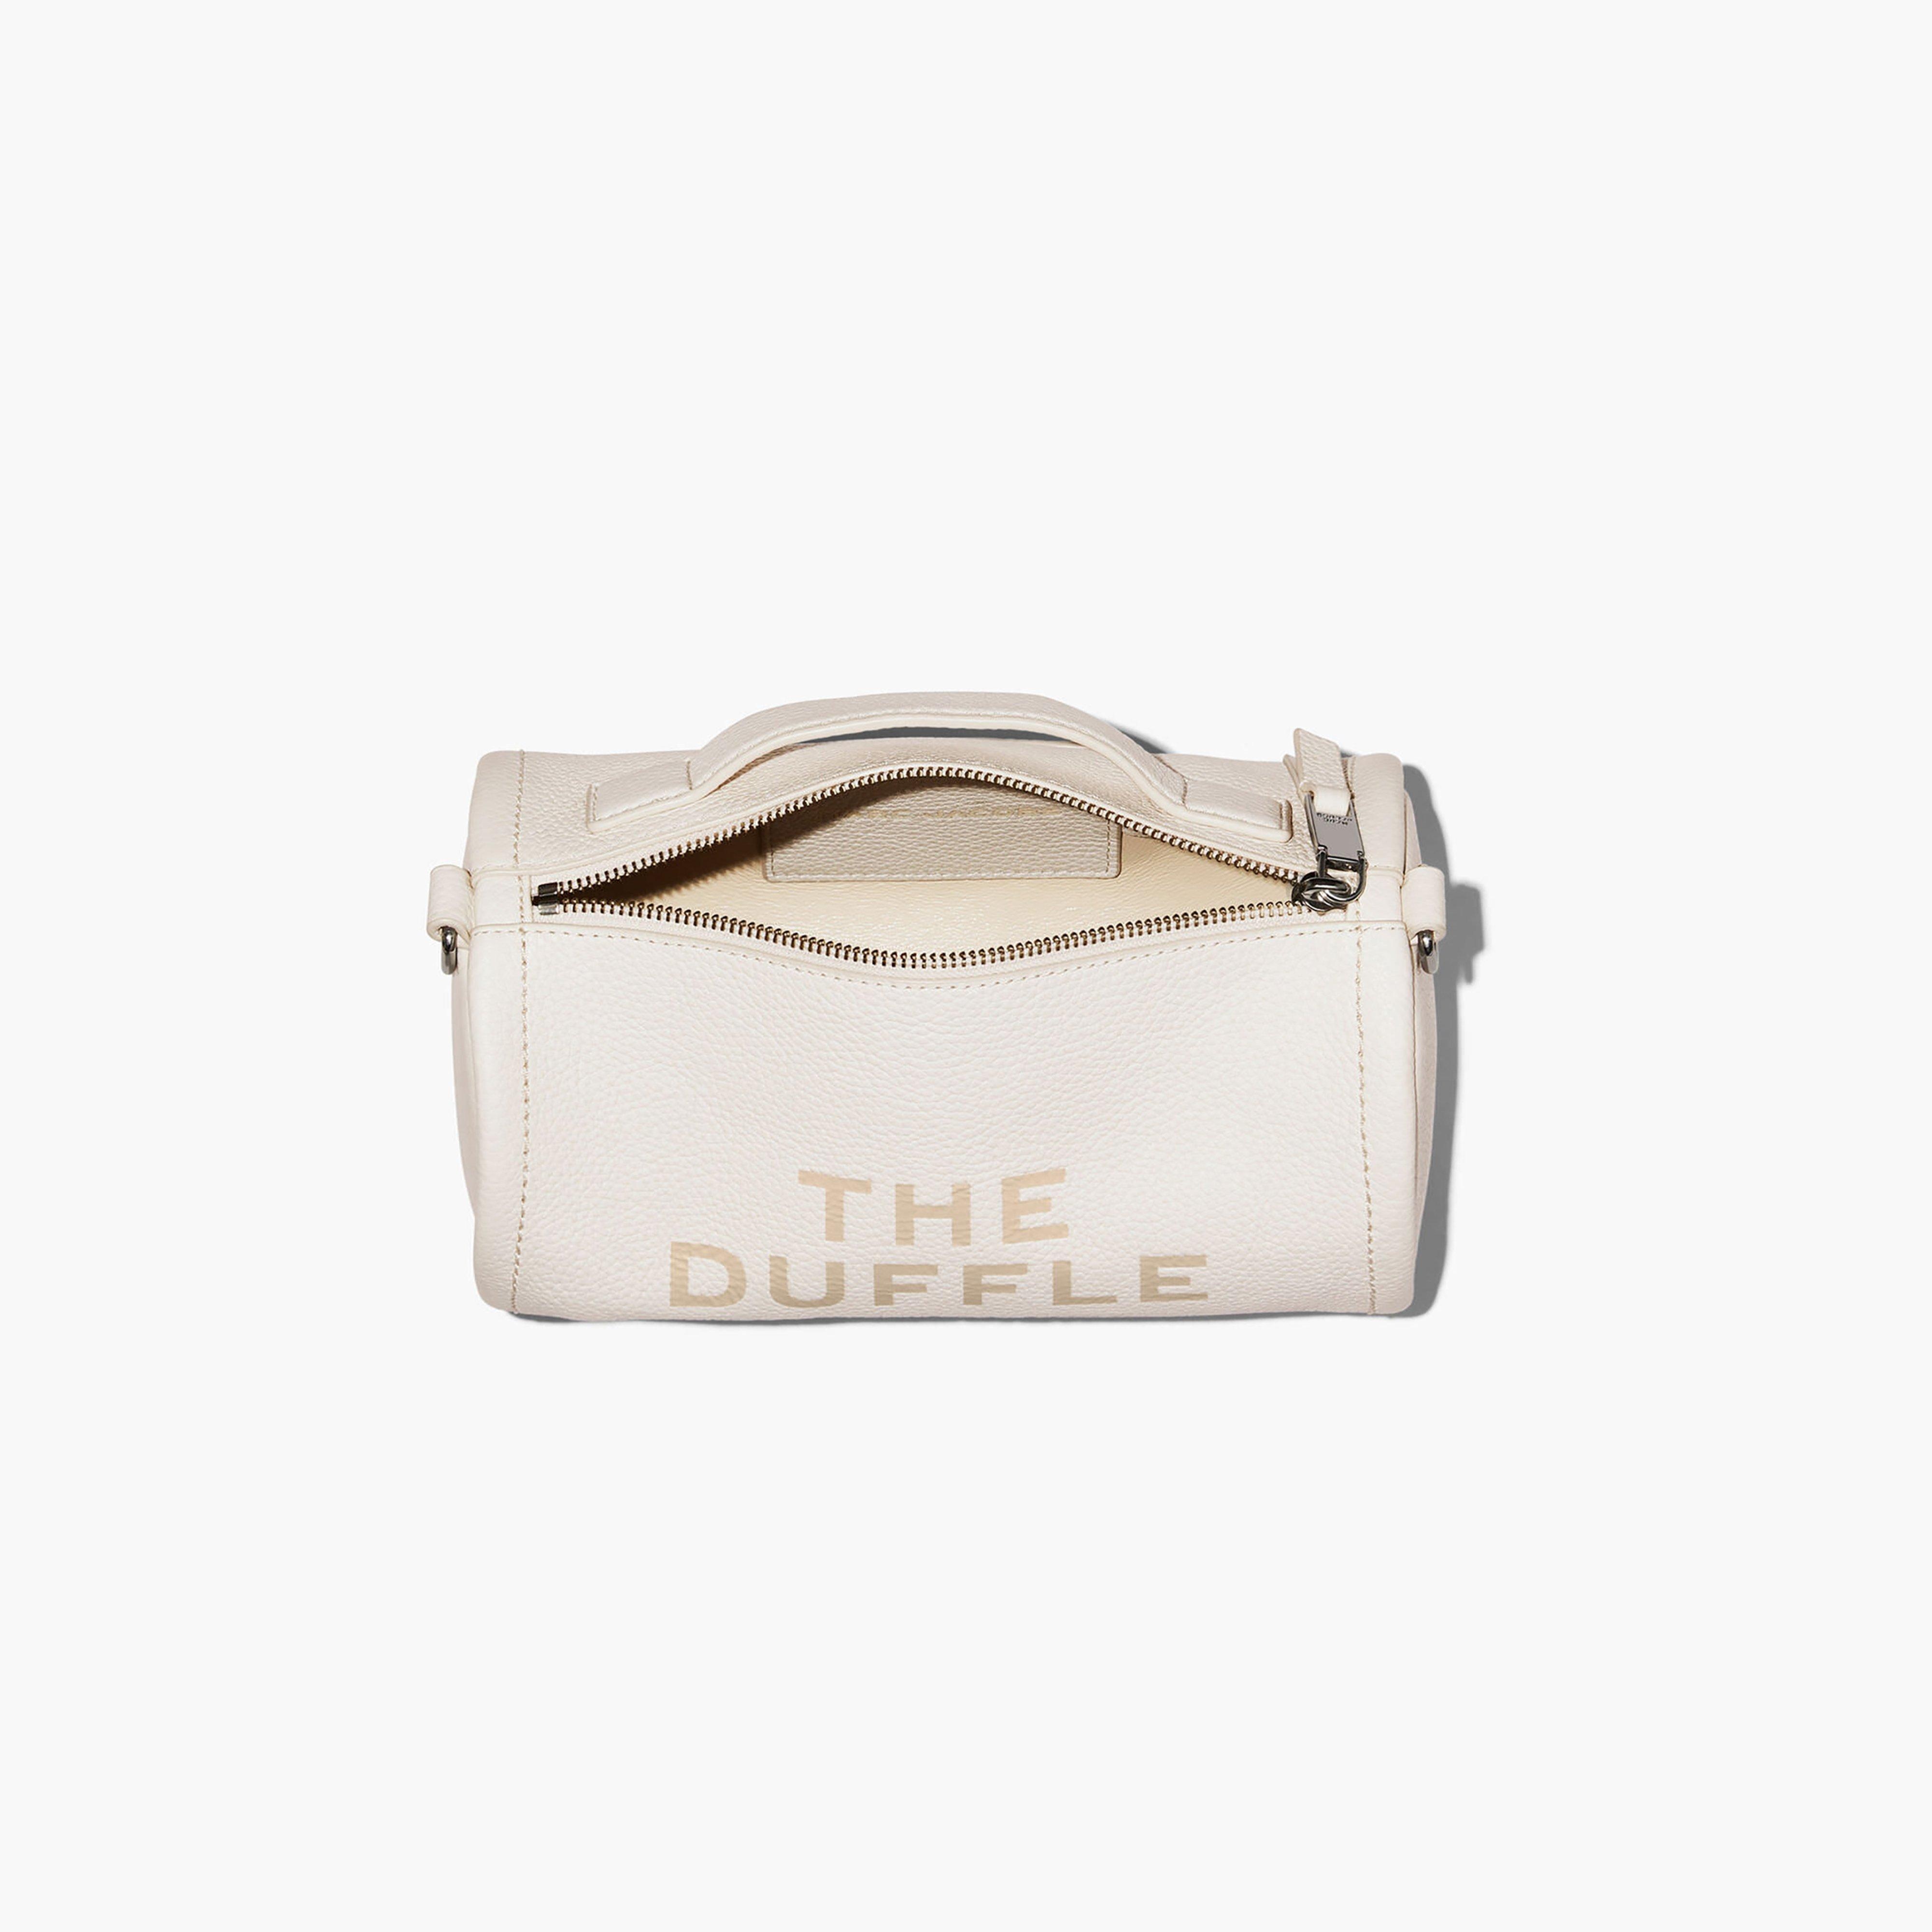 THE LEATHER DUFFLE BAG - 7